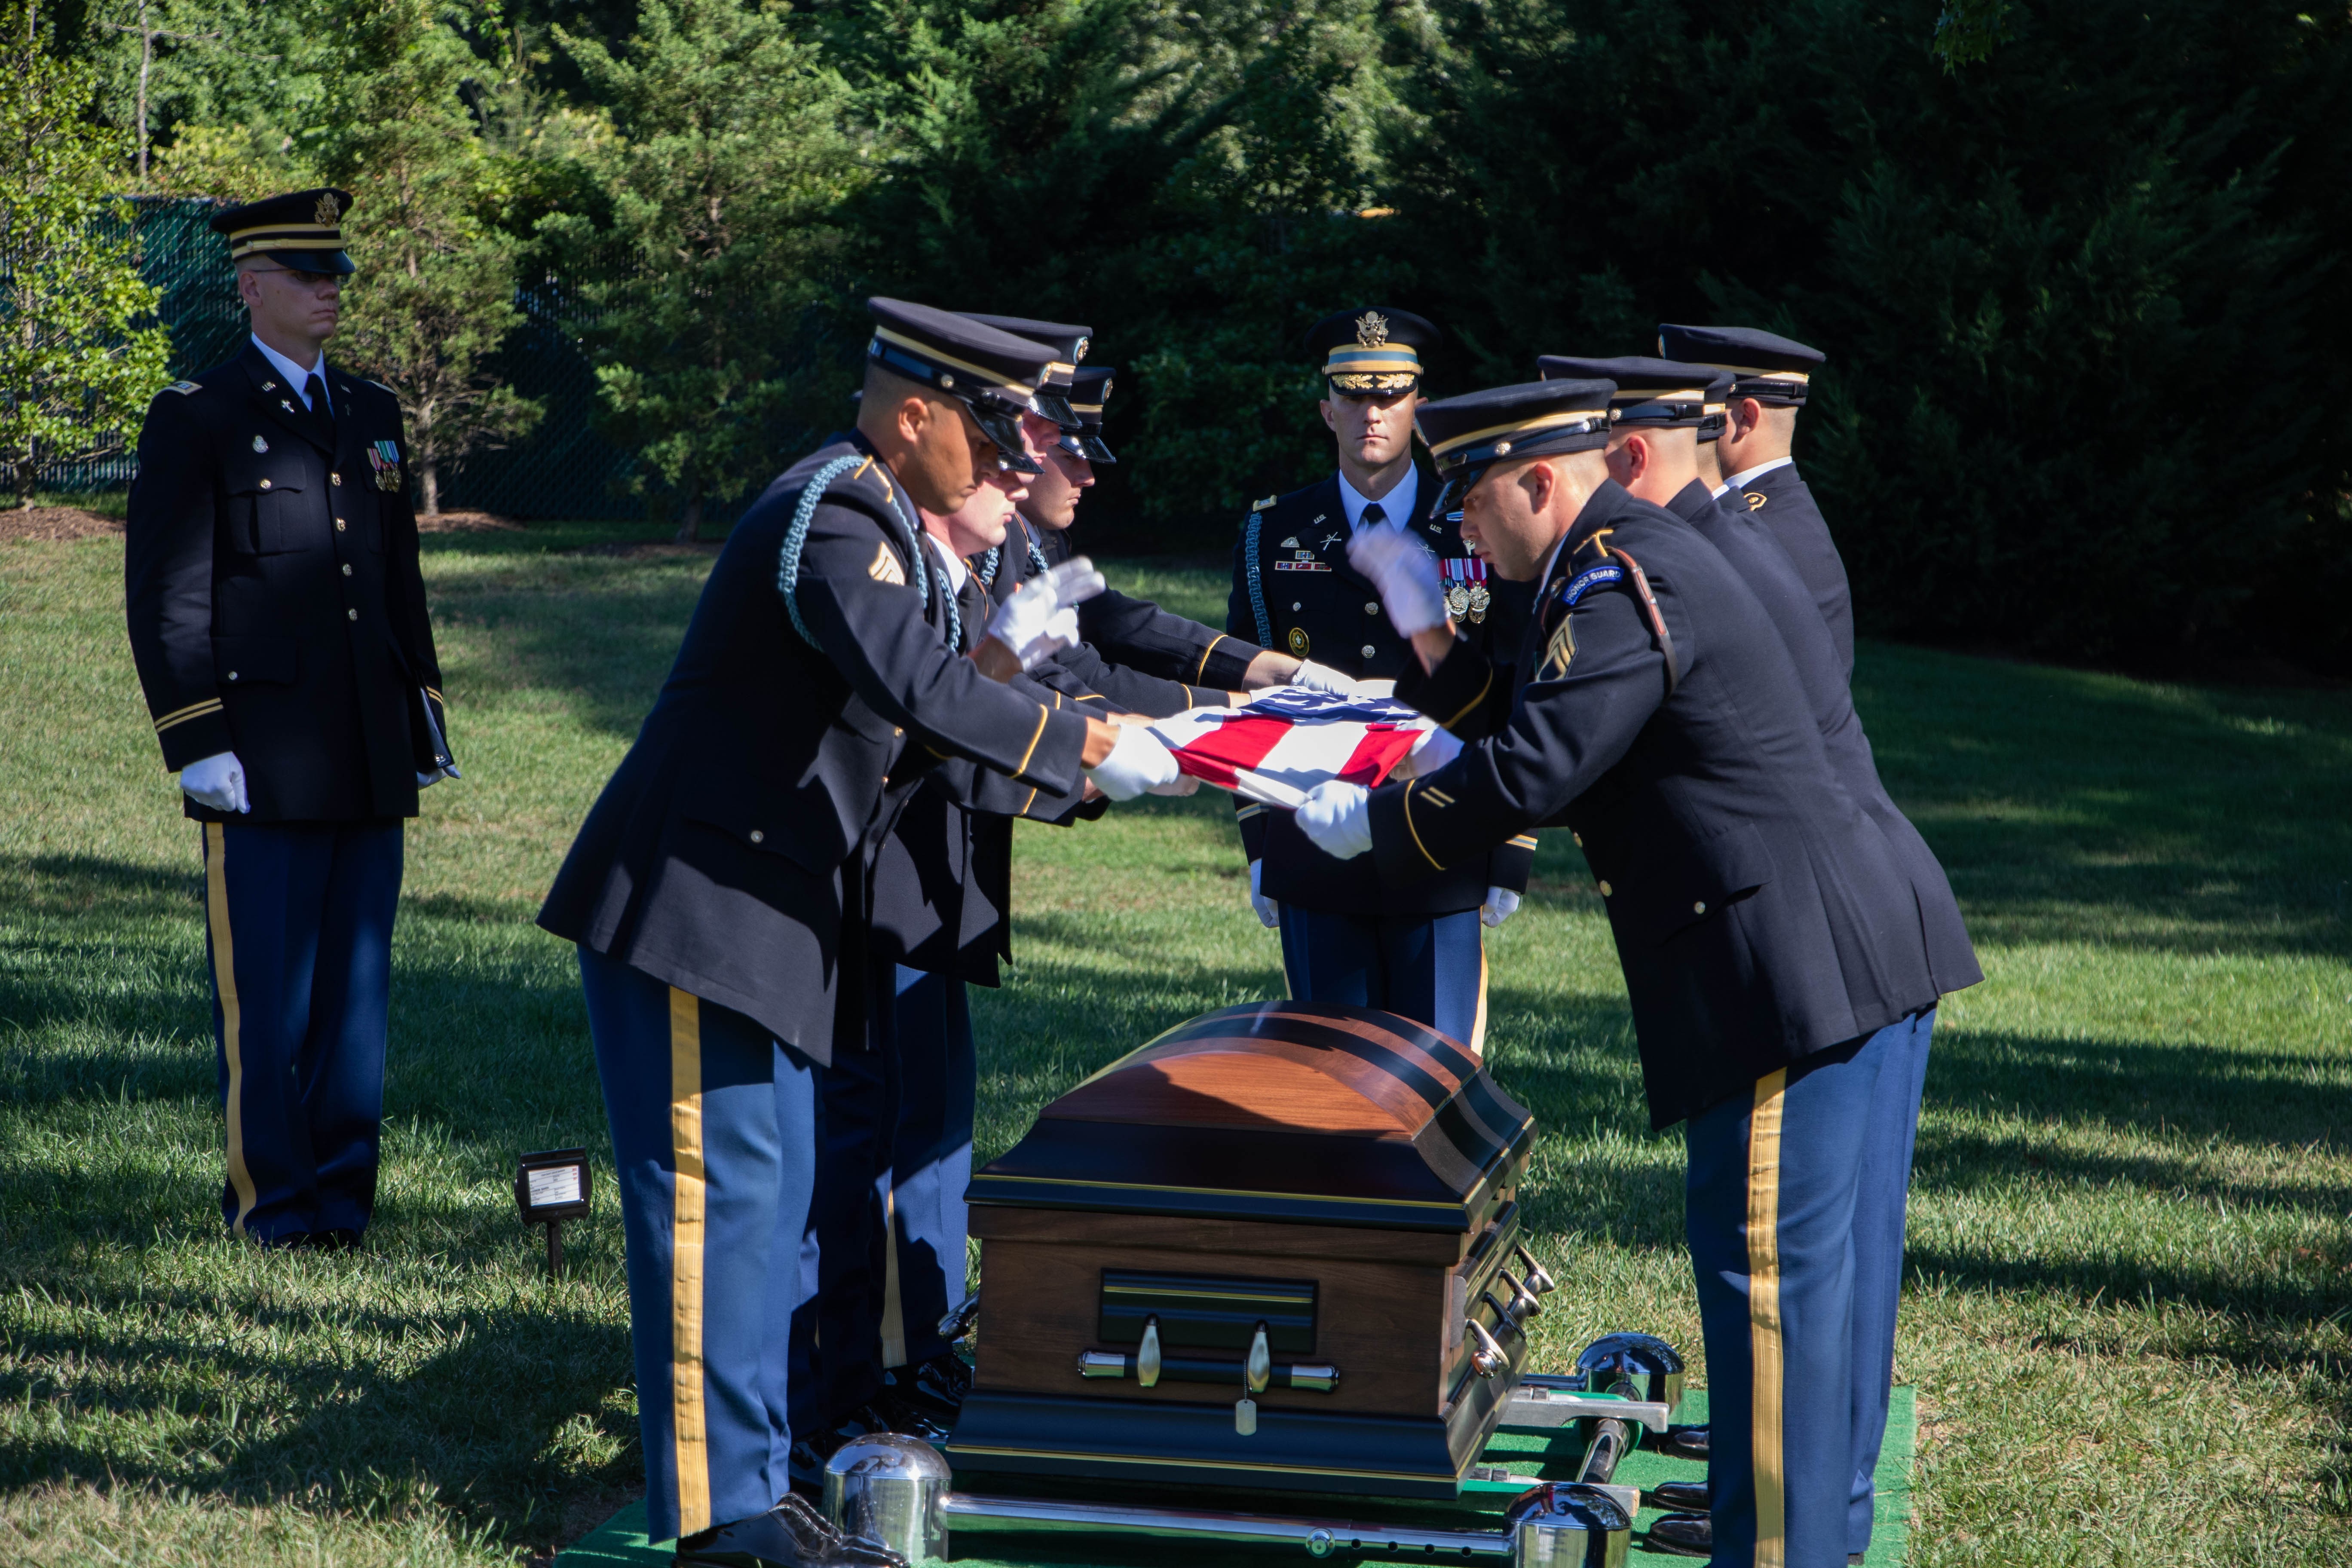 MIA-Medal air force 1 shell of Honor recipient and WWII Army pilot laid to rest